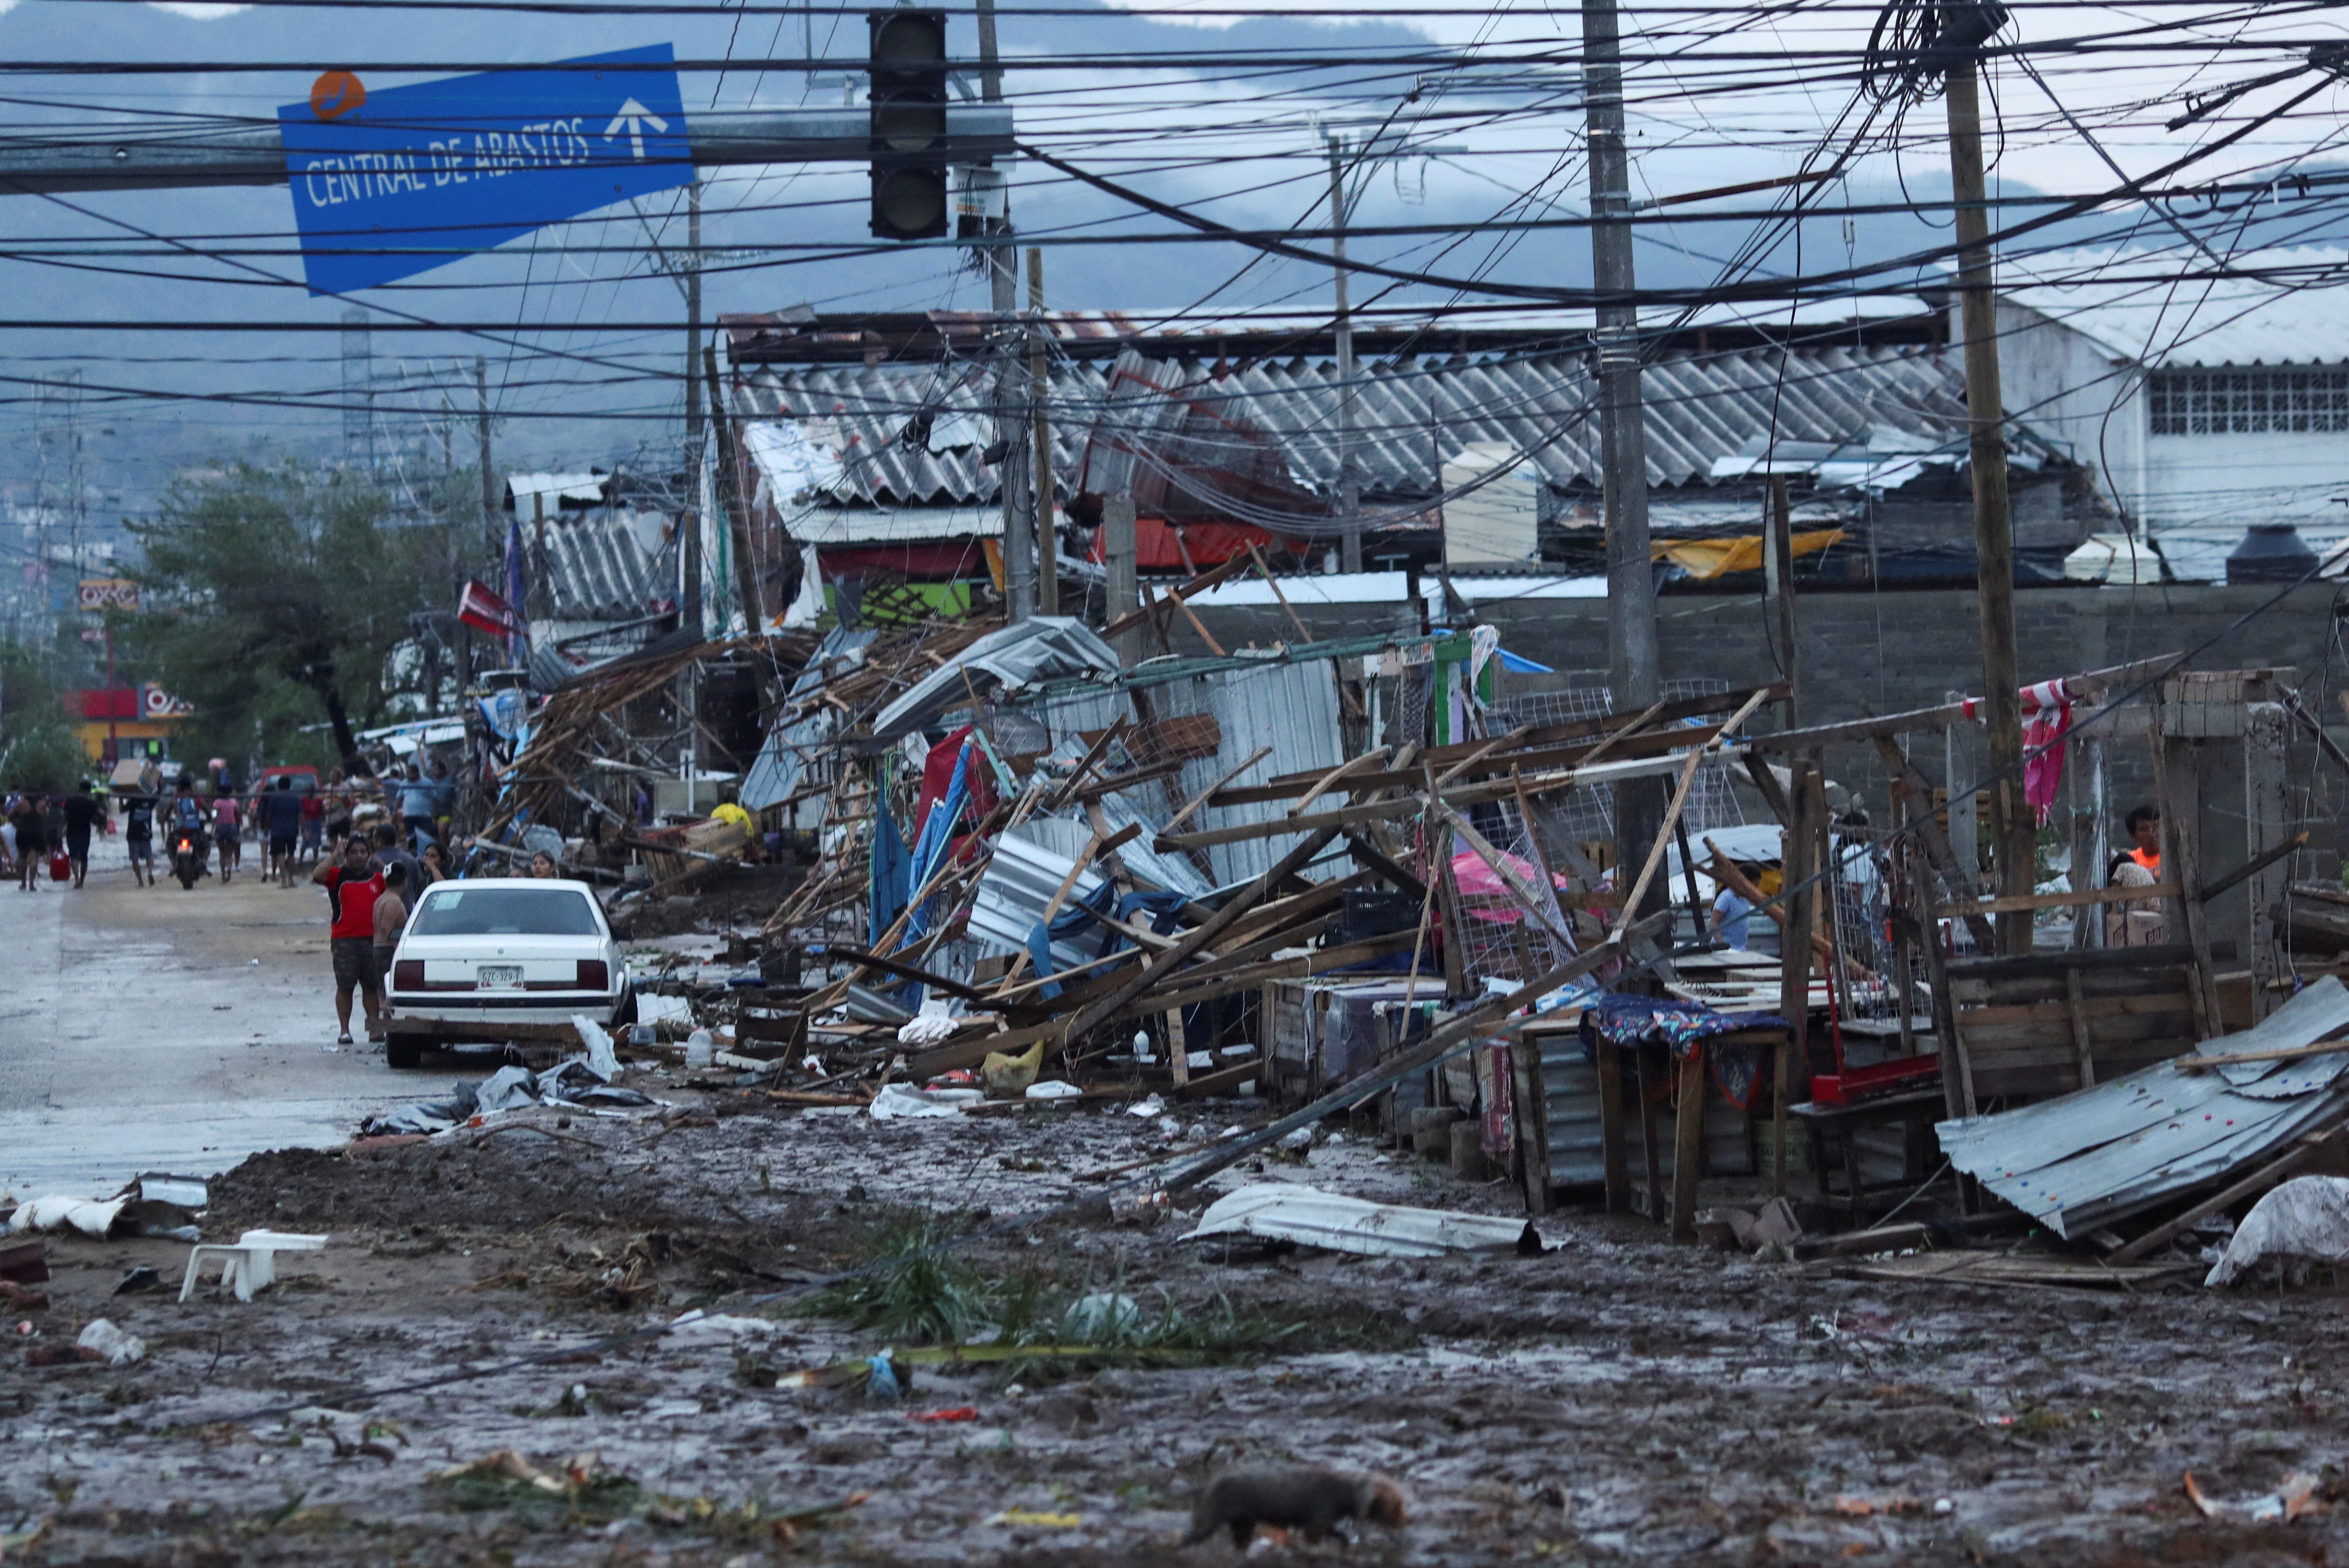 A view shows street stalls damaged by Hurricane Otis near the entrance to Acapulco, in the Mexican state of Guerrero